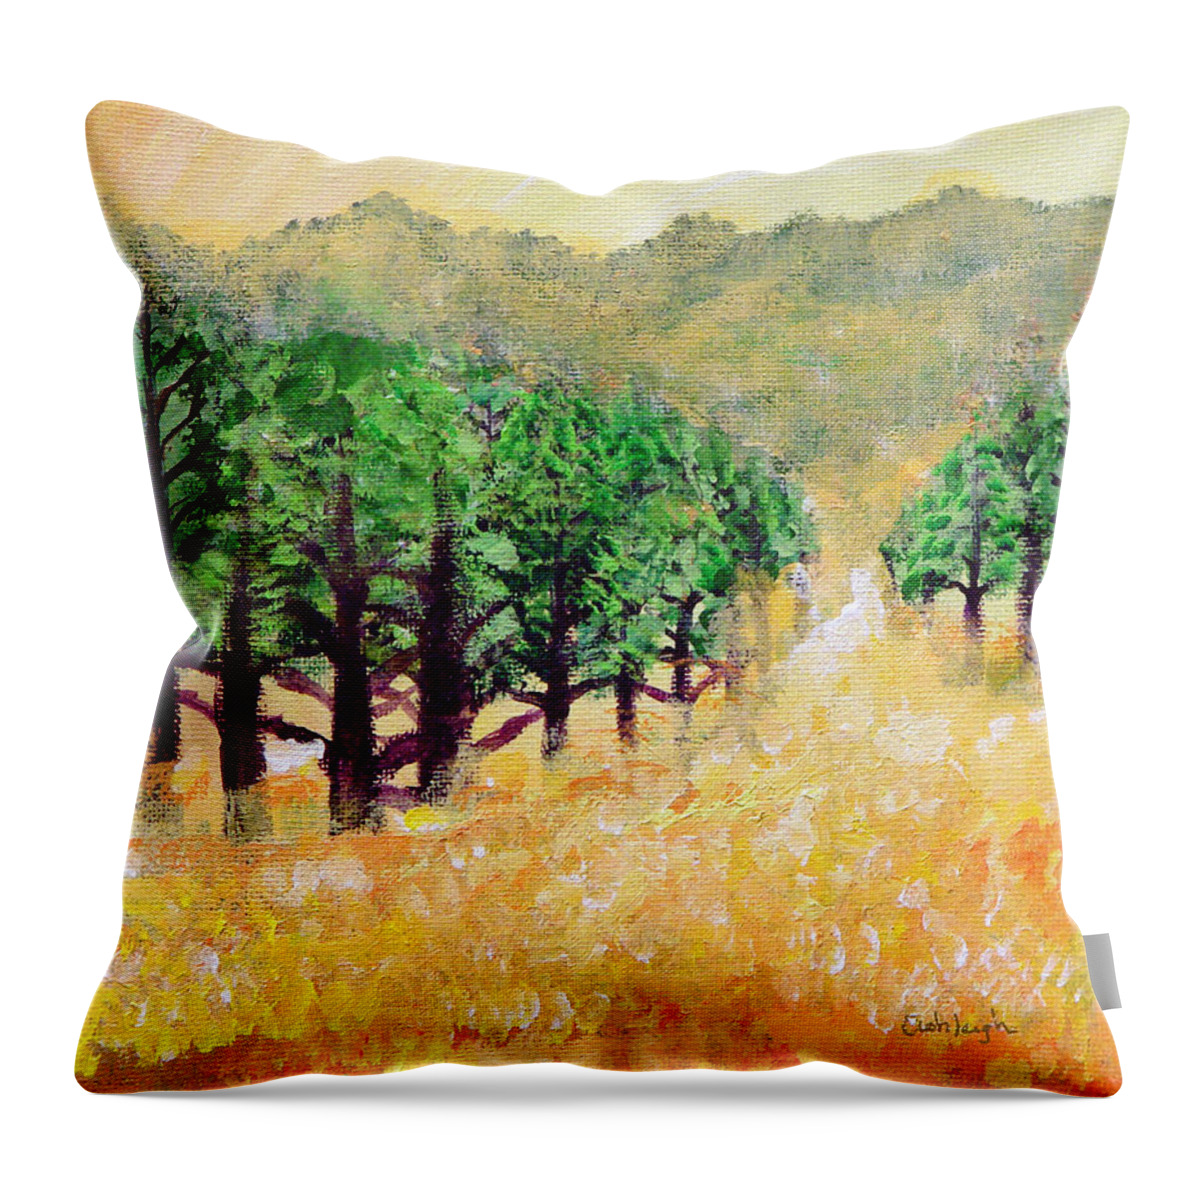 Landscape Throw Pillow featuring the painting Life's Path by Ashleigh Dyan Bayer